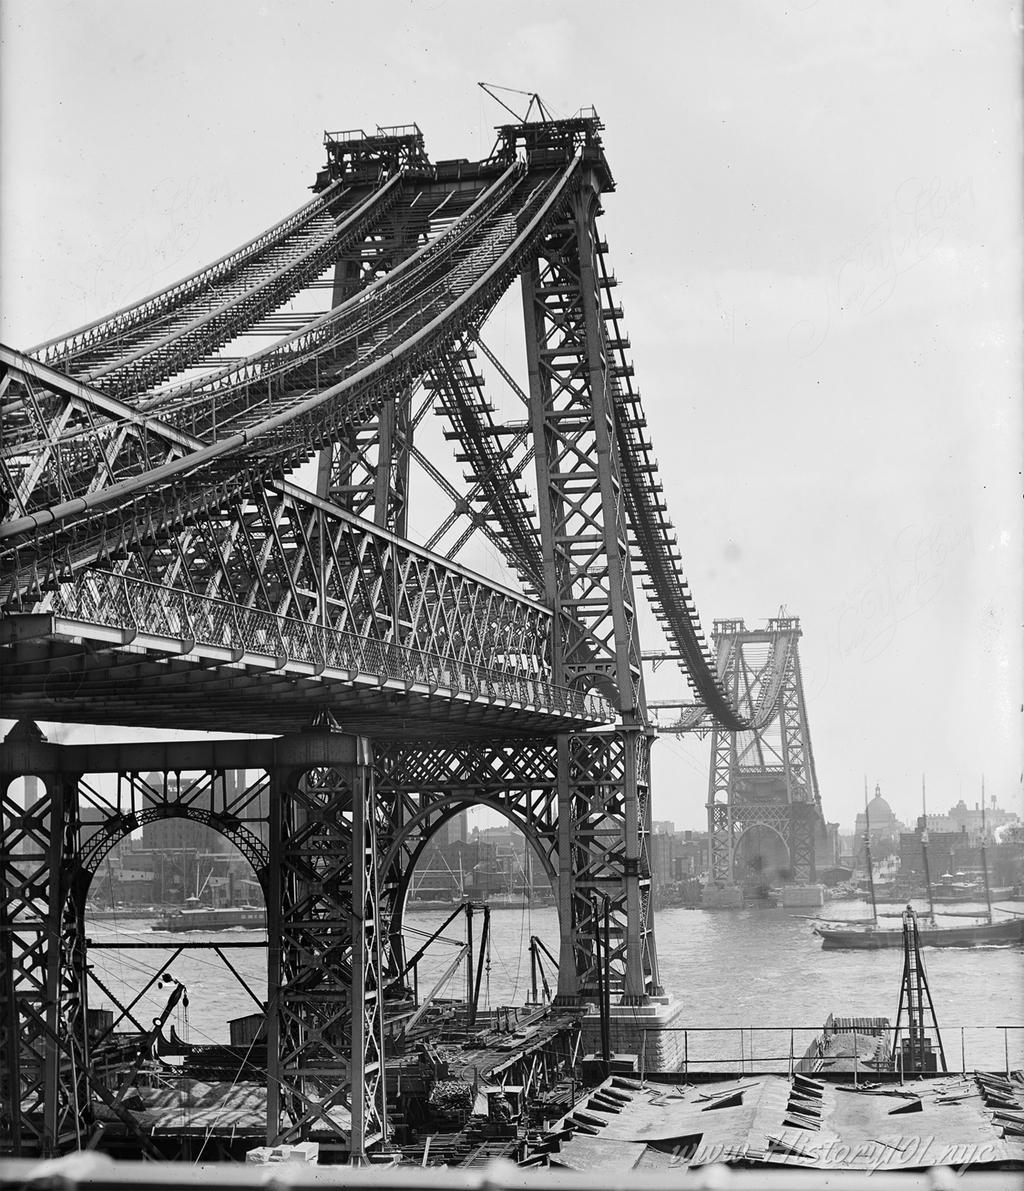 Photograph of a growing Williamsburg Bridge, spanning the East River and facing Brooklyn.